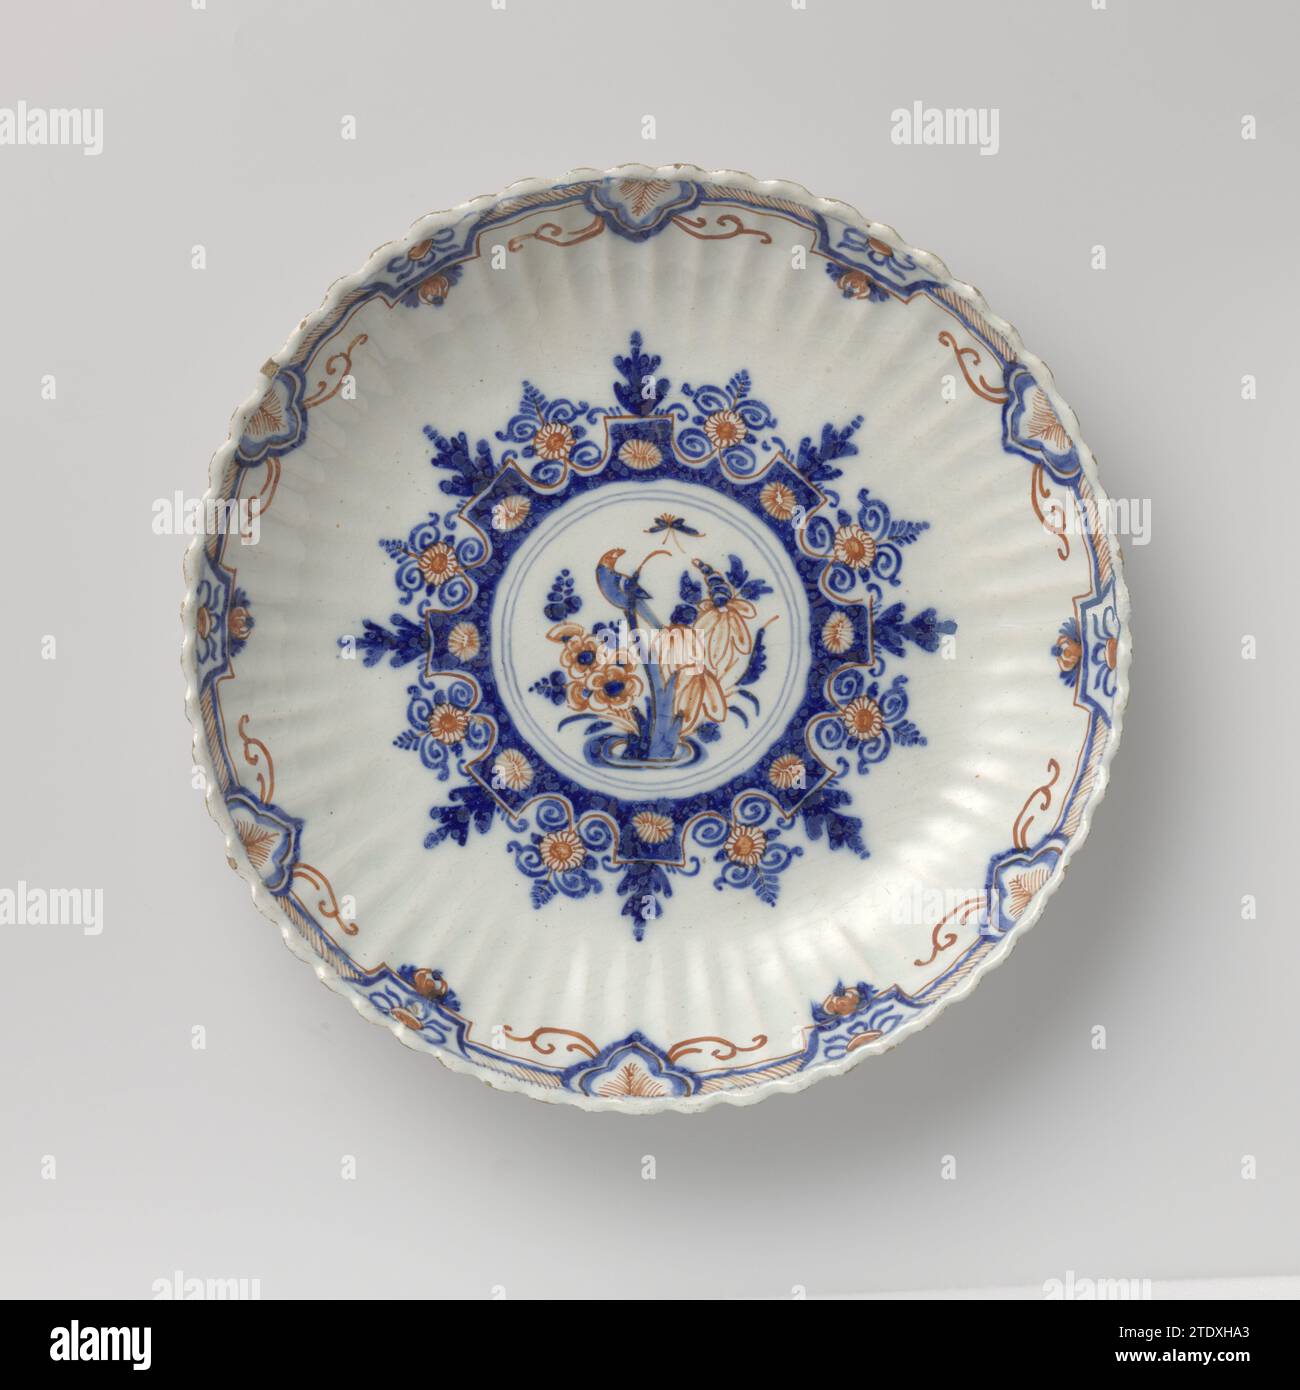 Dish of multicolored painted Faïence, the double gift jug, c. 1700 - c. 1730 Dish of Faience. Rouaan for example. Multicolored painted. The dish is marked. Delft . Dish of Faience. Rouaan for example. Multicolored painted. The dish is marked. Delft . Stock Photo